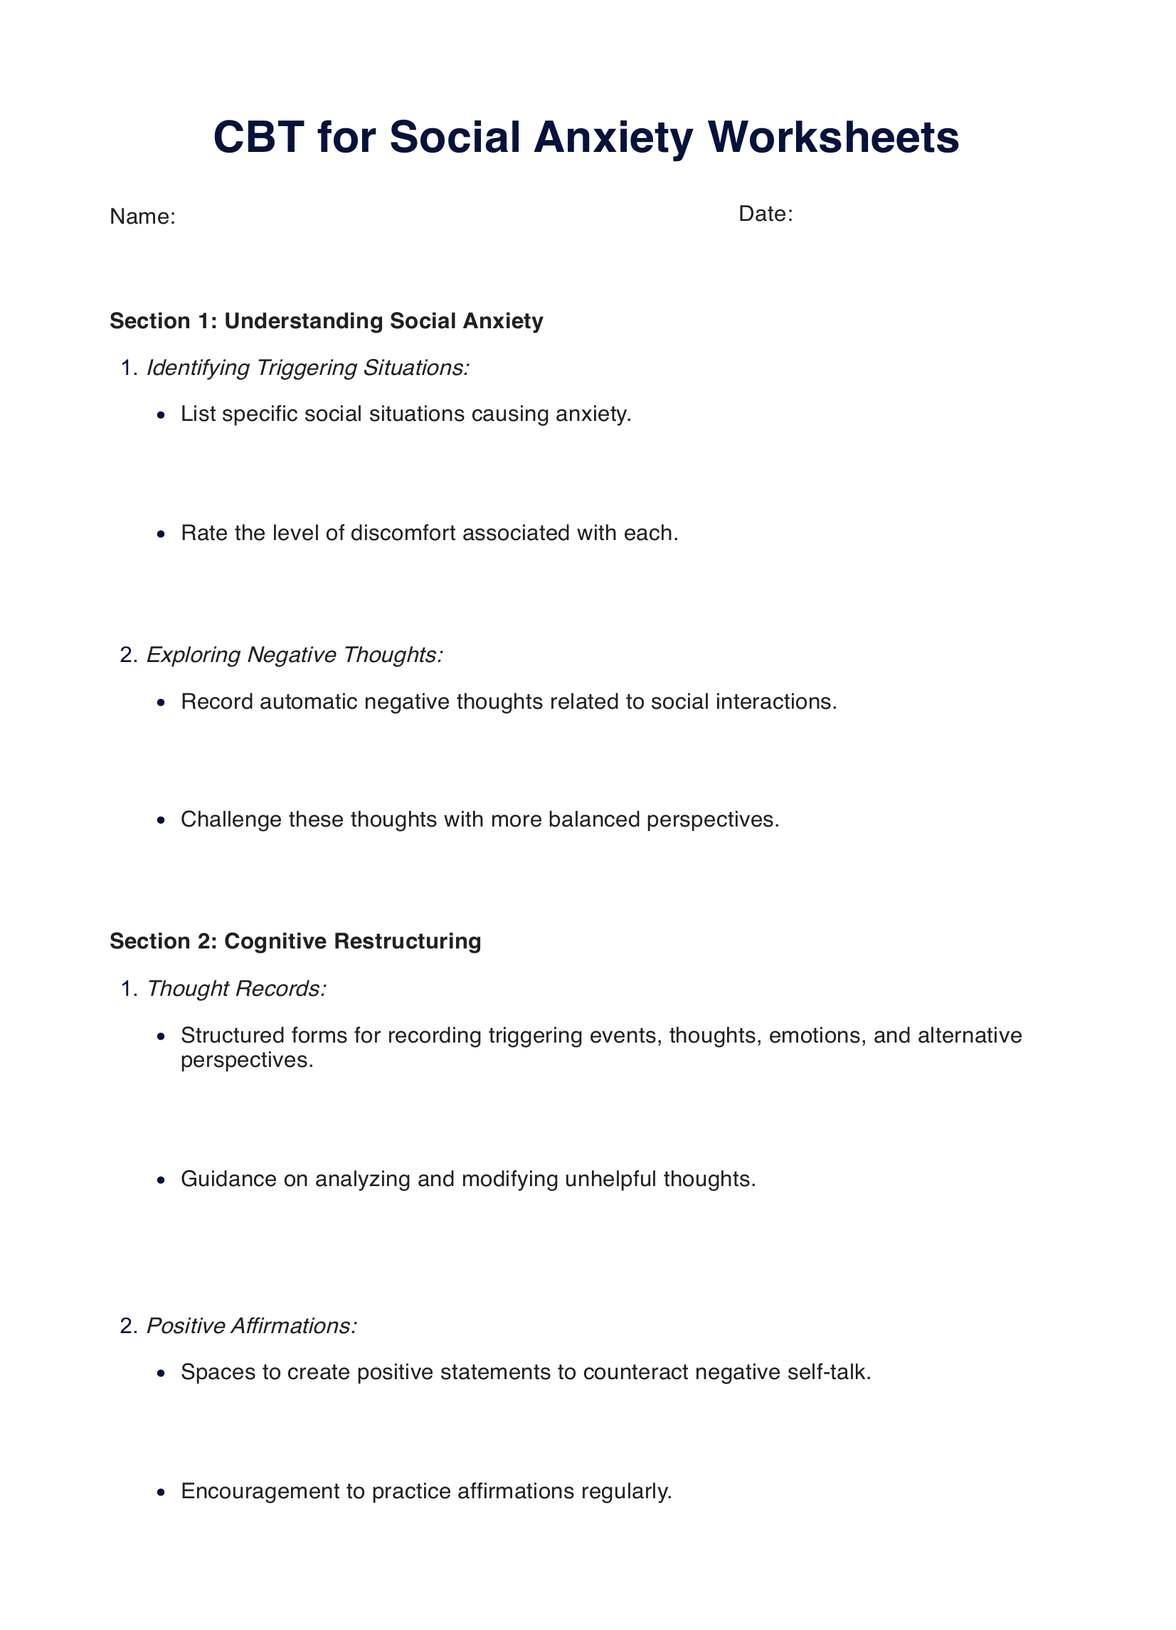 CBT for Social Anxiety Worksheets PDF PDF Example